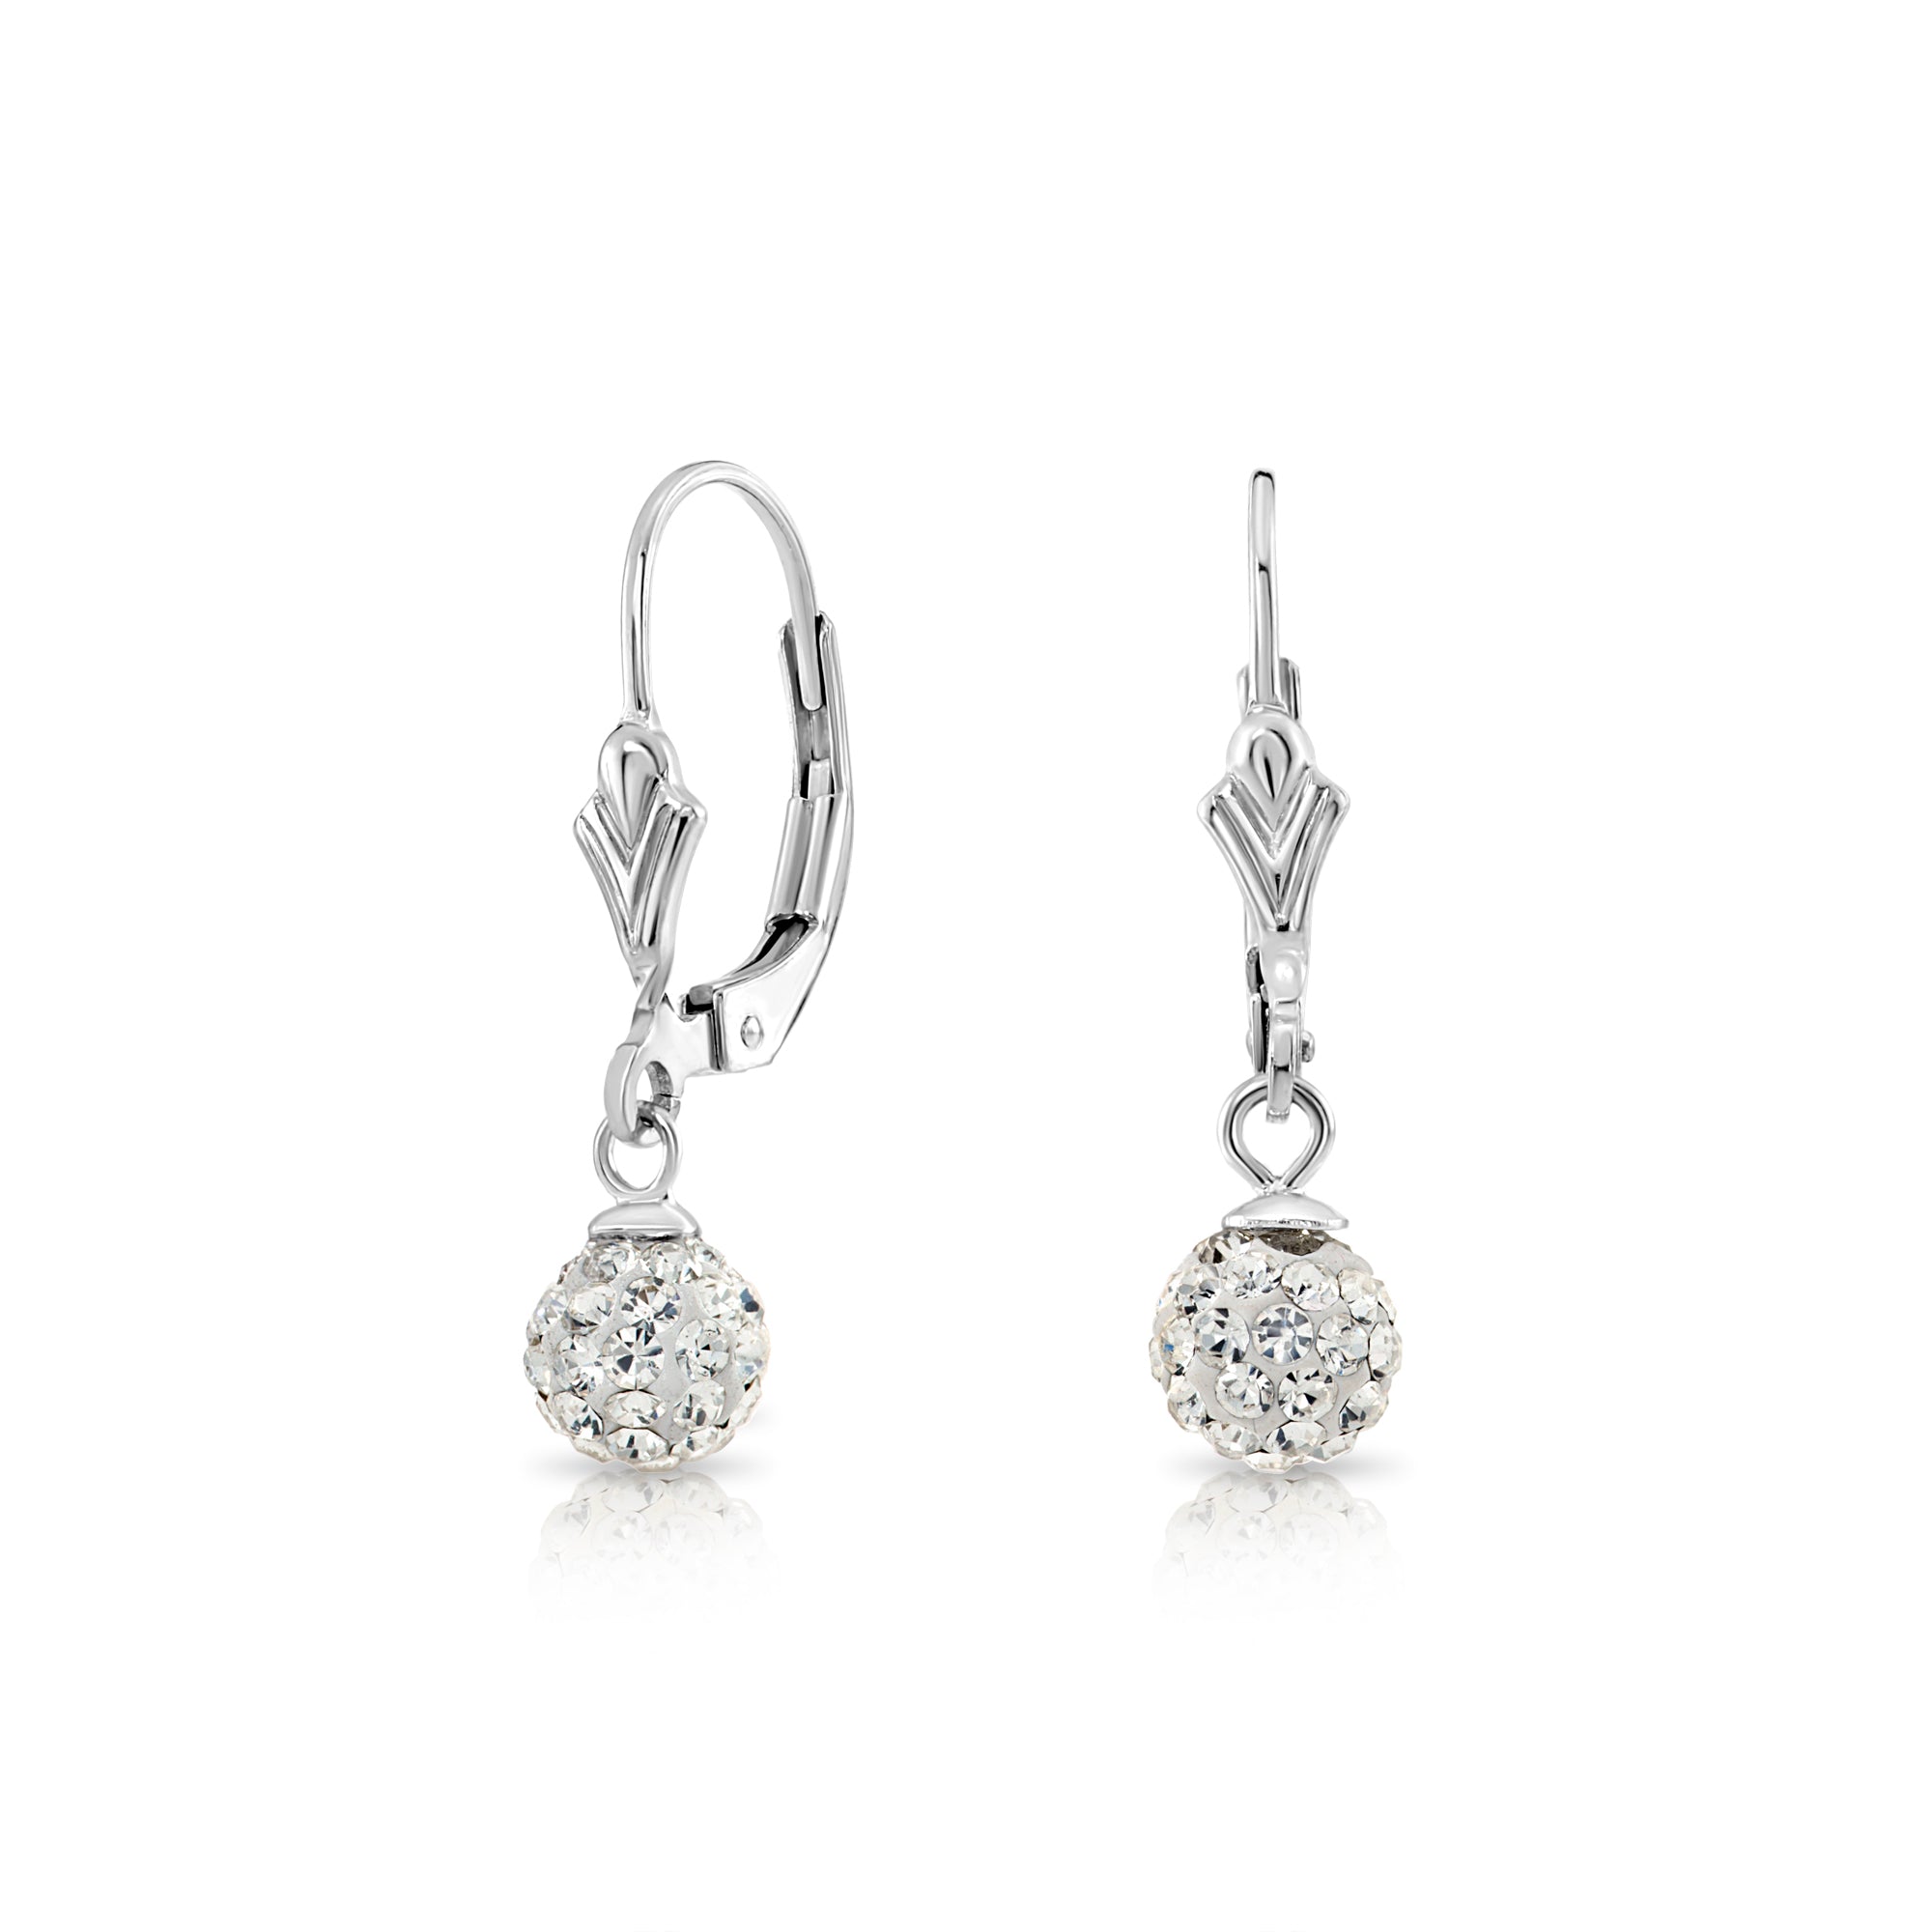 CZ Crystal Ball French-back Earrings in